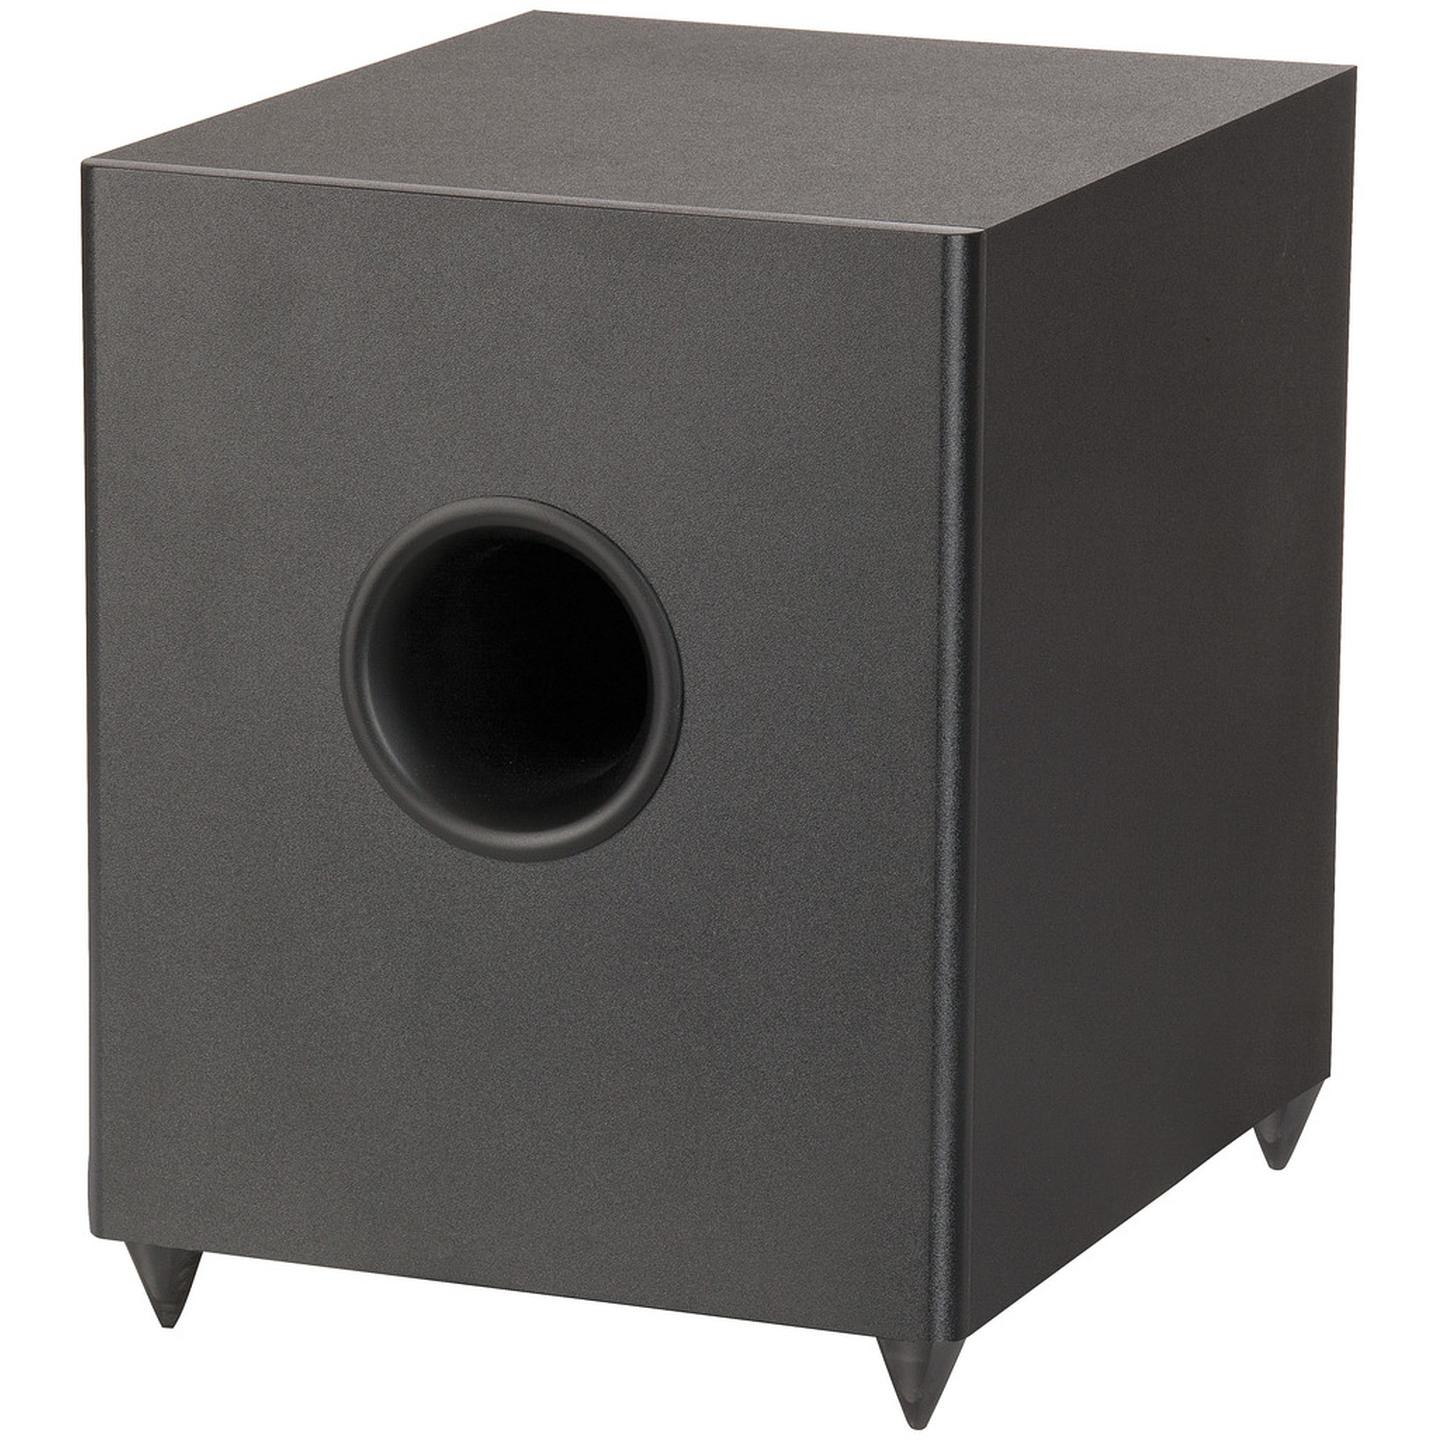 8 Active Subwoofer with Satellite Output